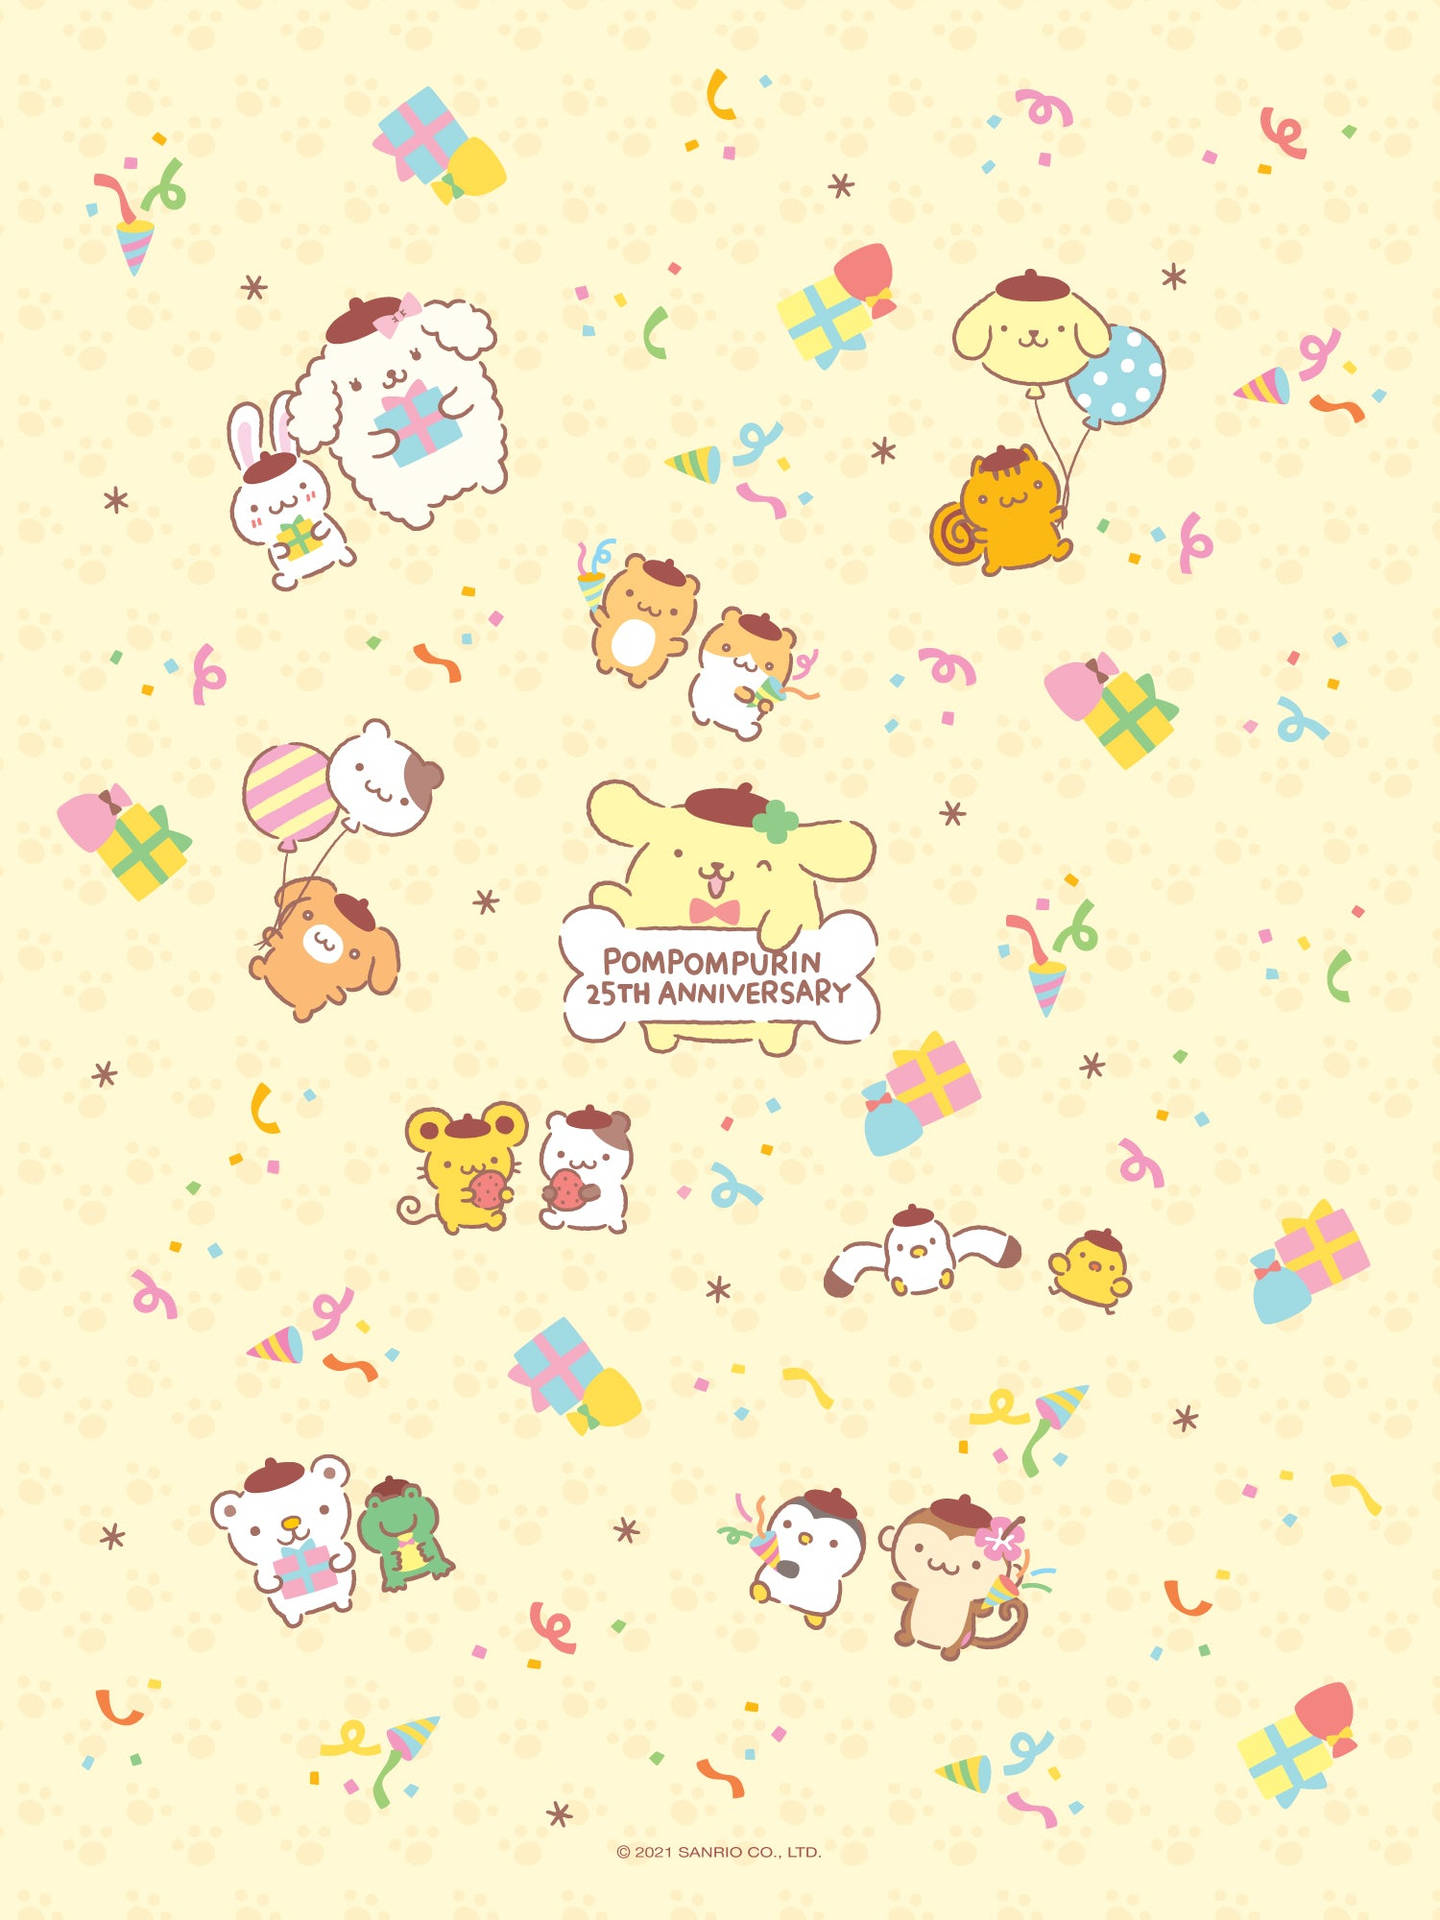 Pompompurin 25th Anniversary Poster Background